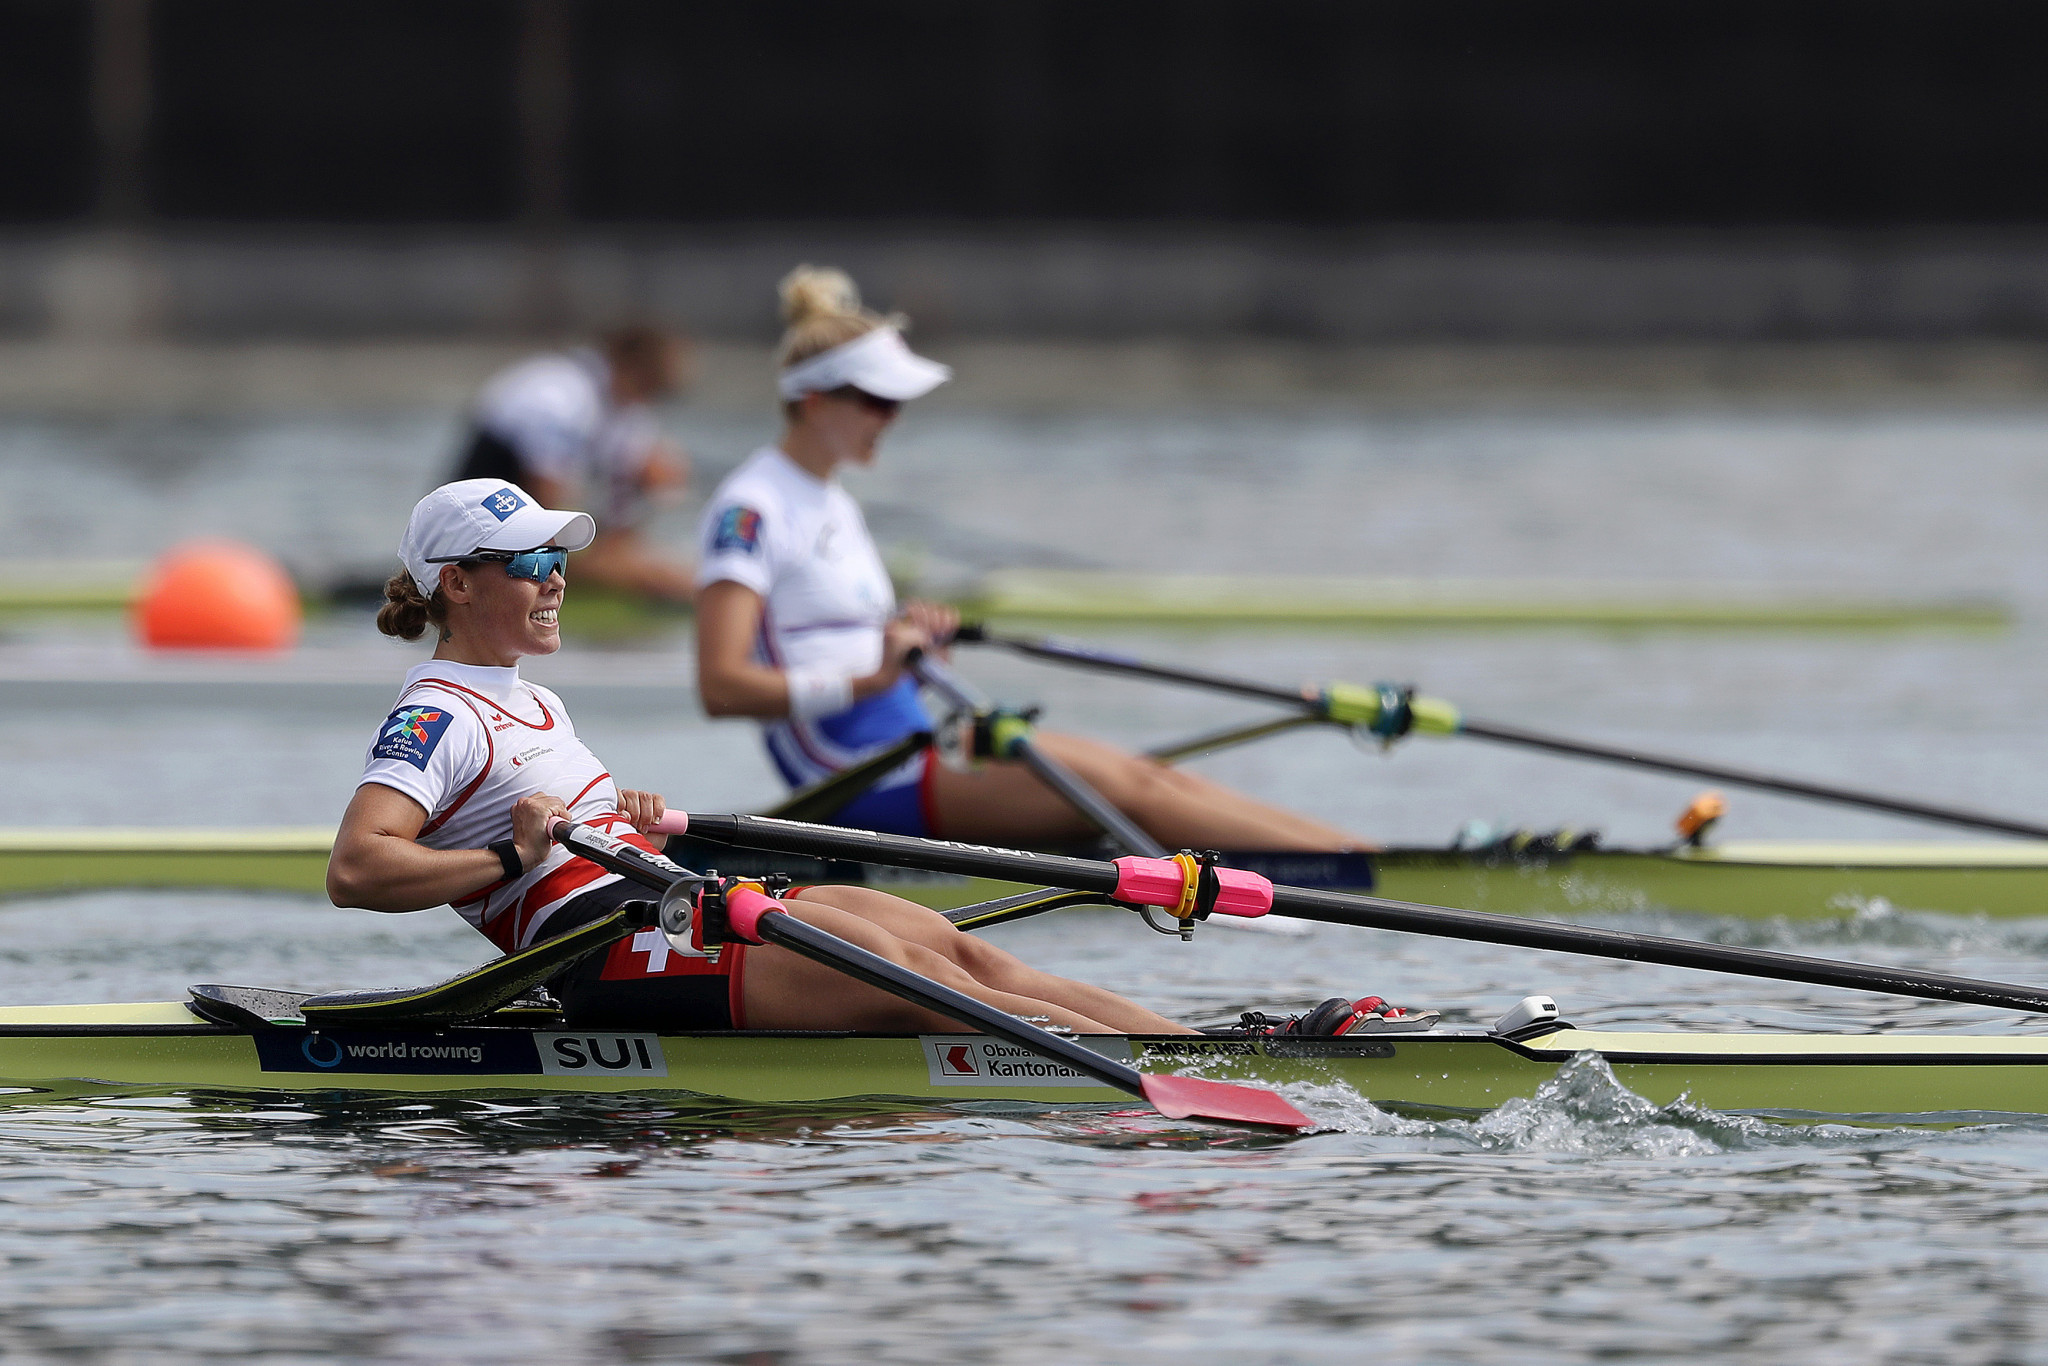 FISA exploring possibility of moving 2021 World Rowing Championships before Olympics